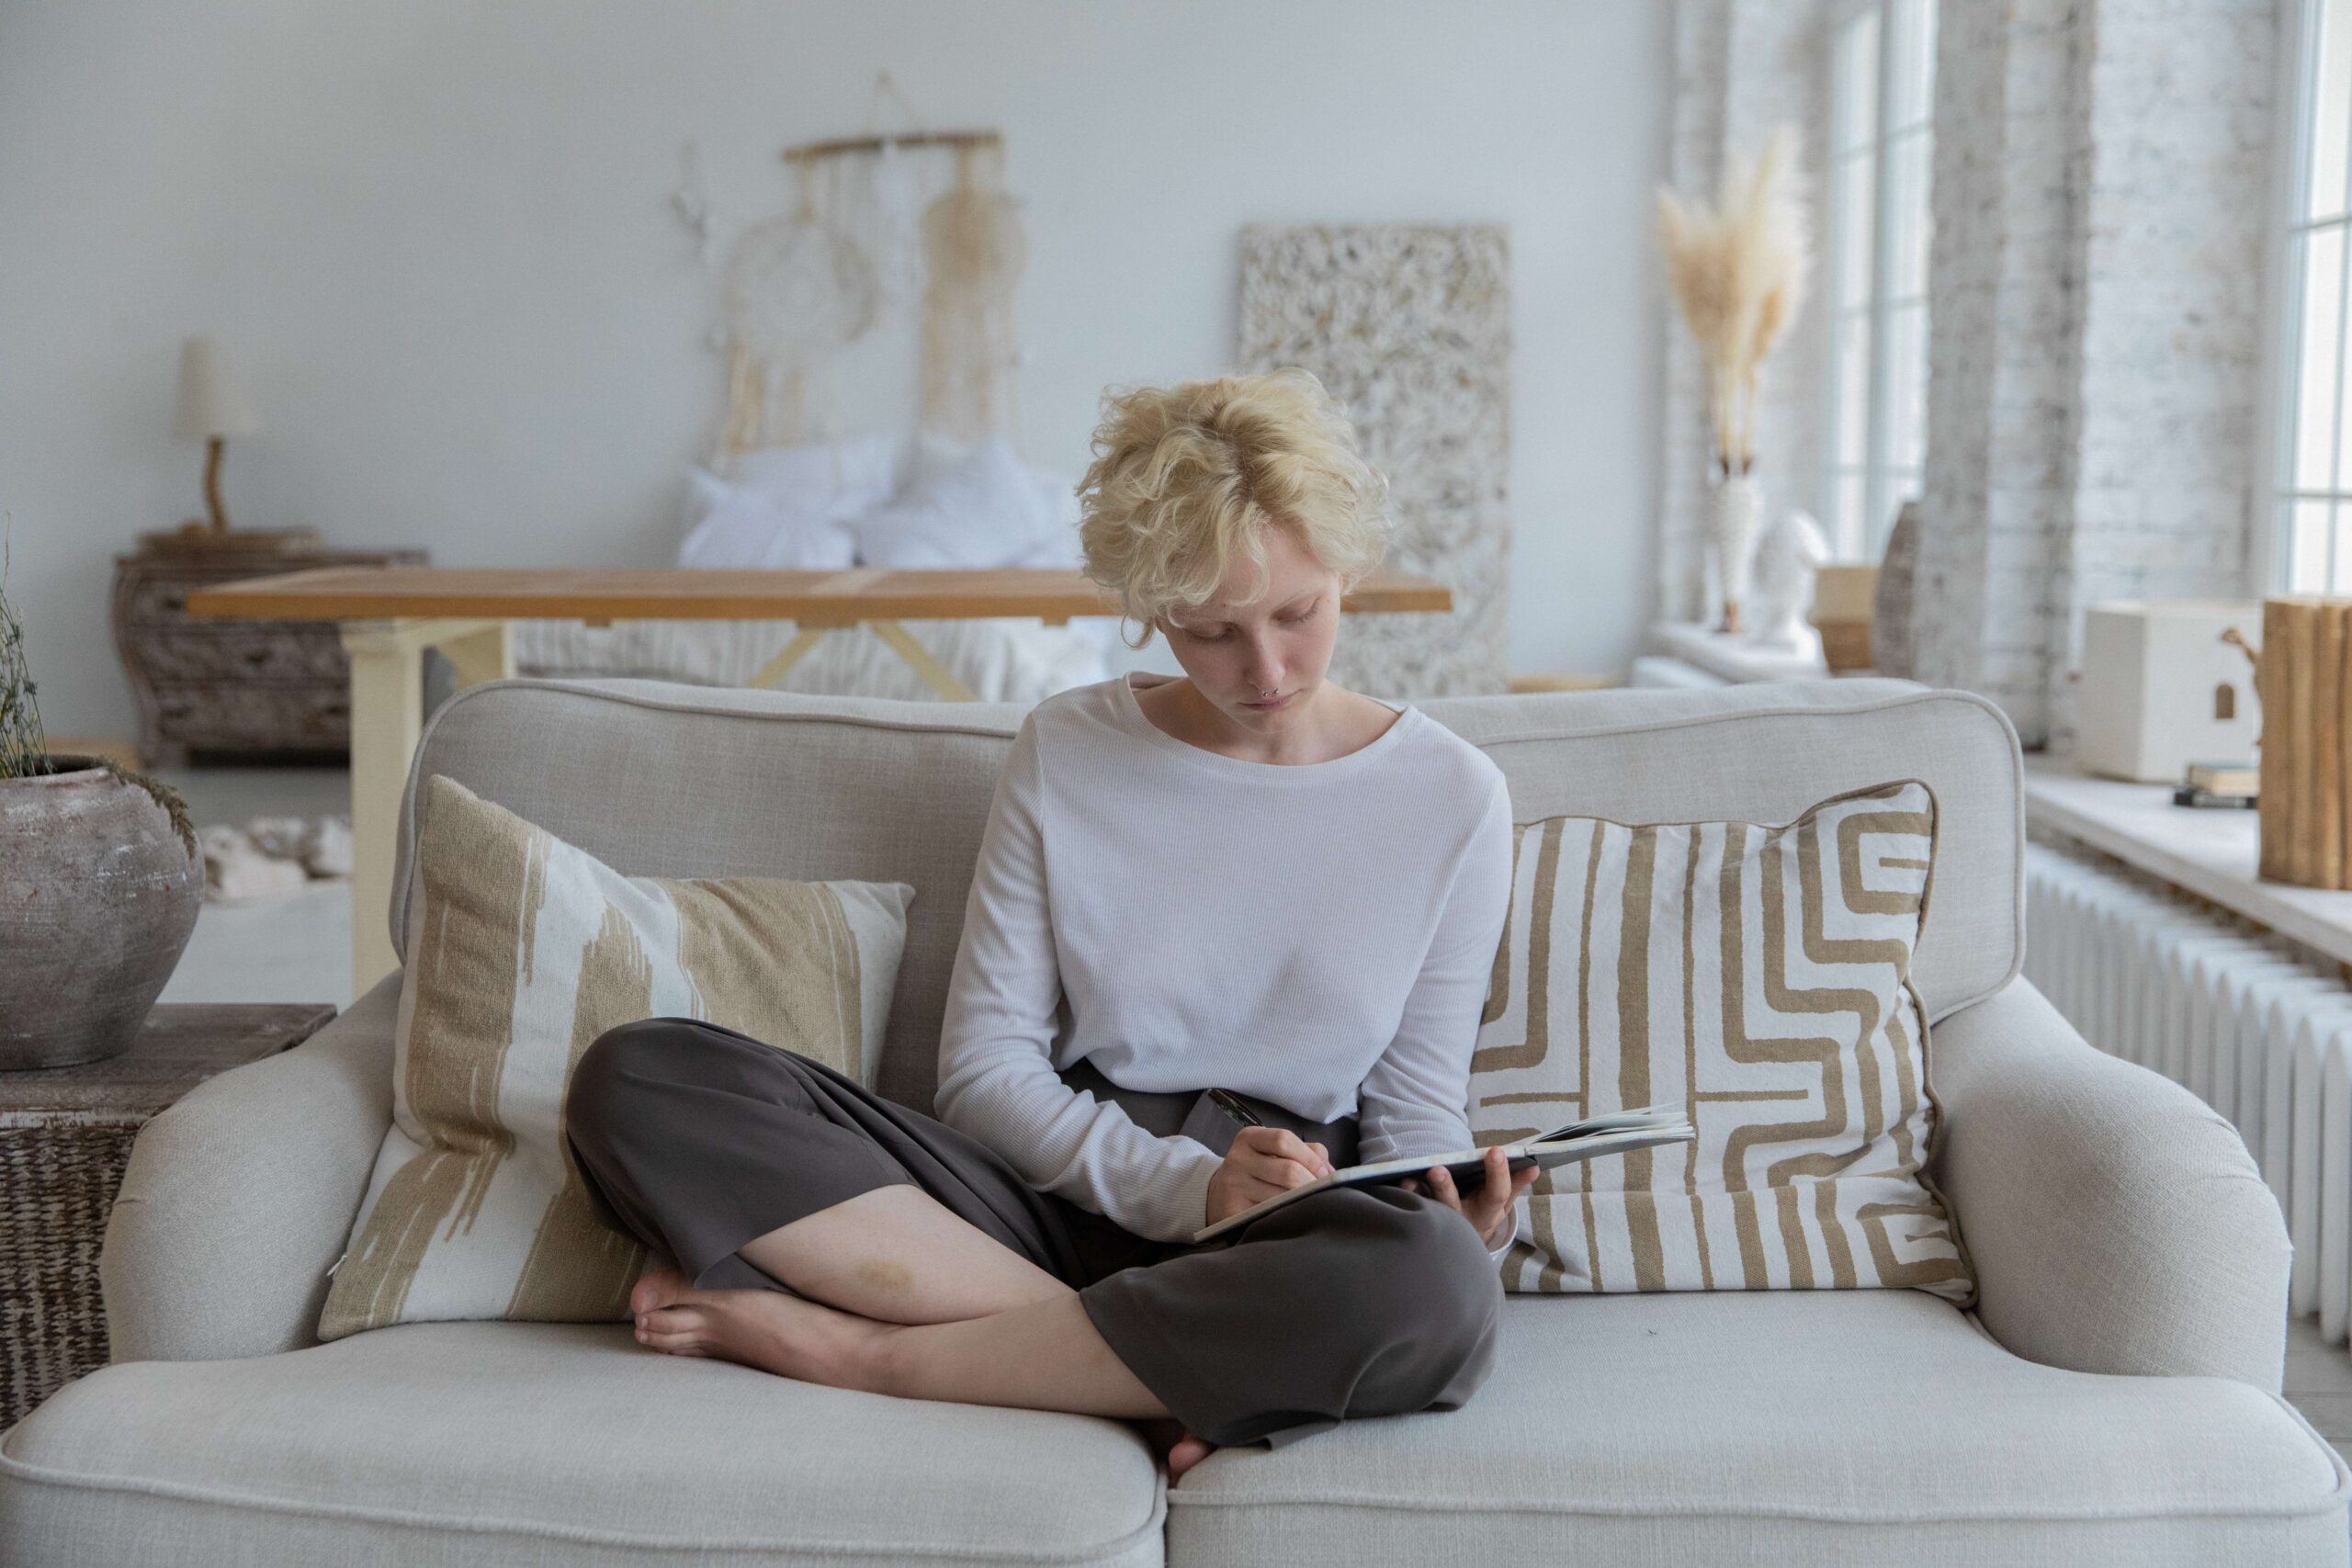 blonde haired woman on a couch writing on a pad